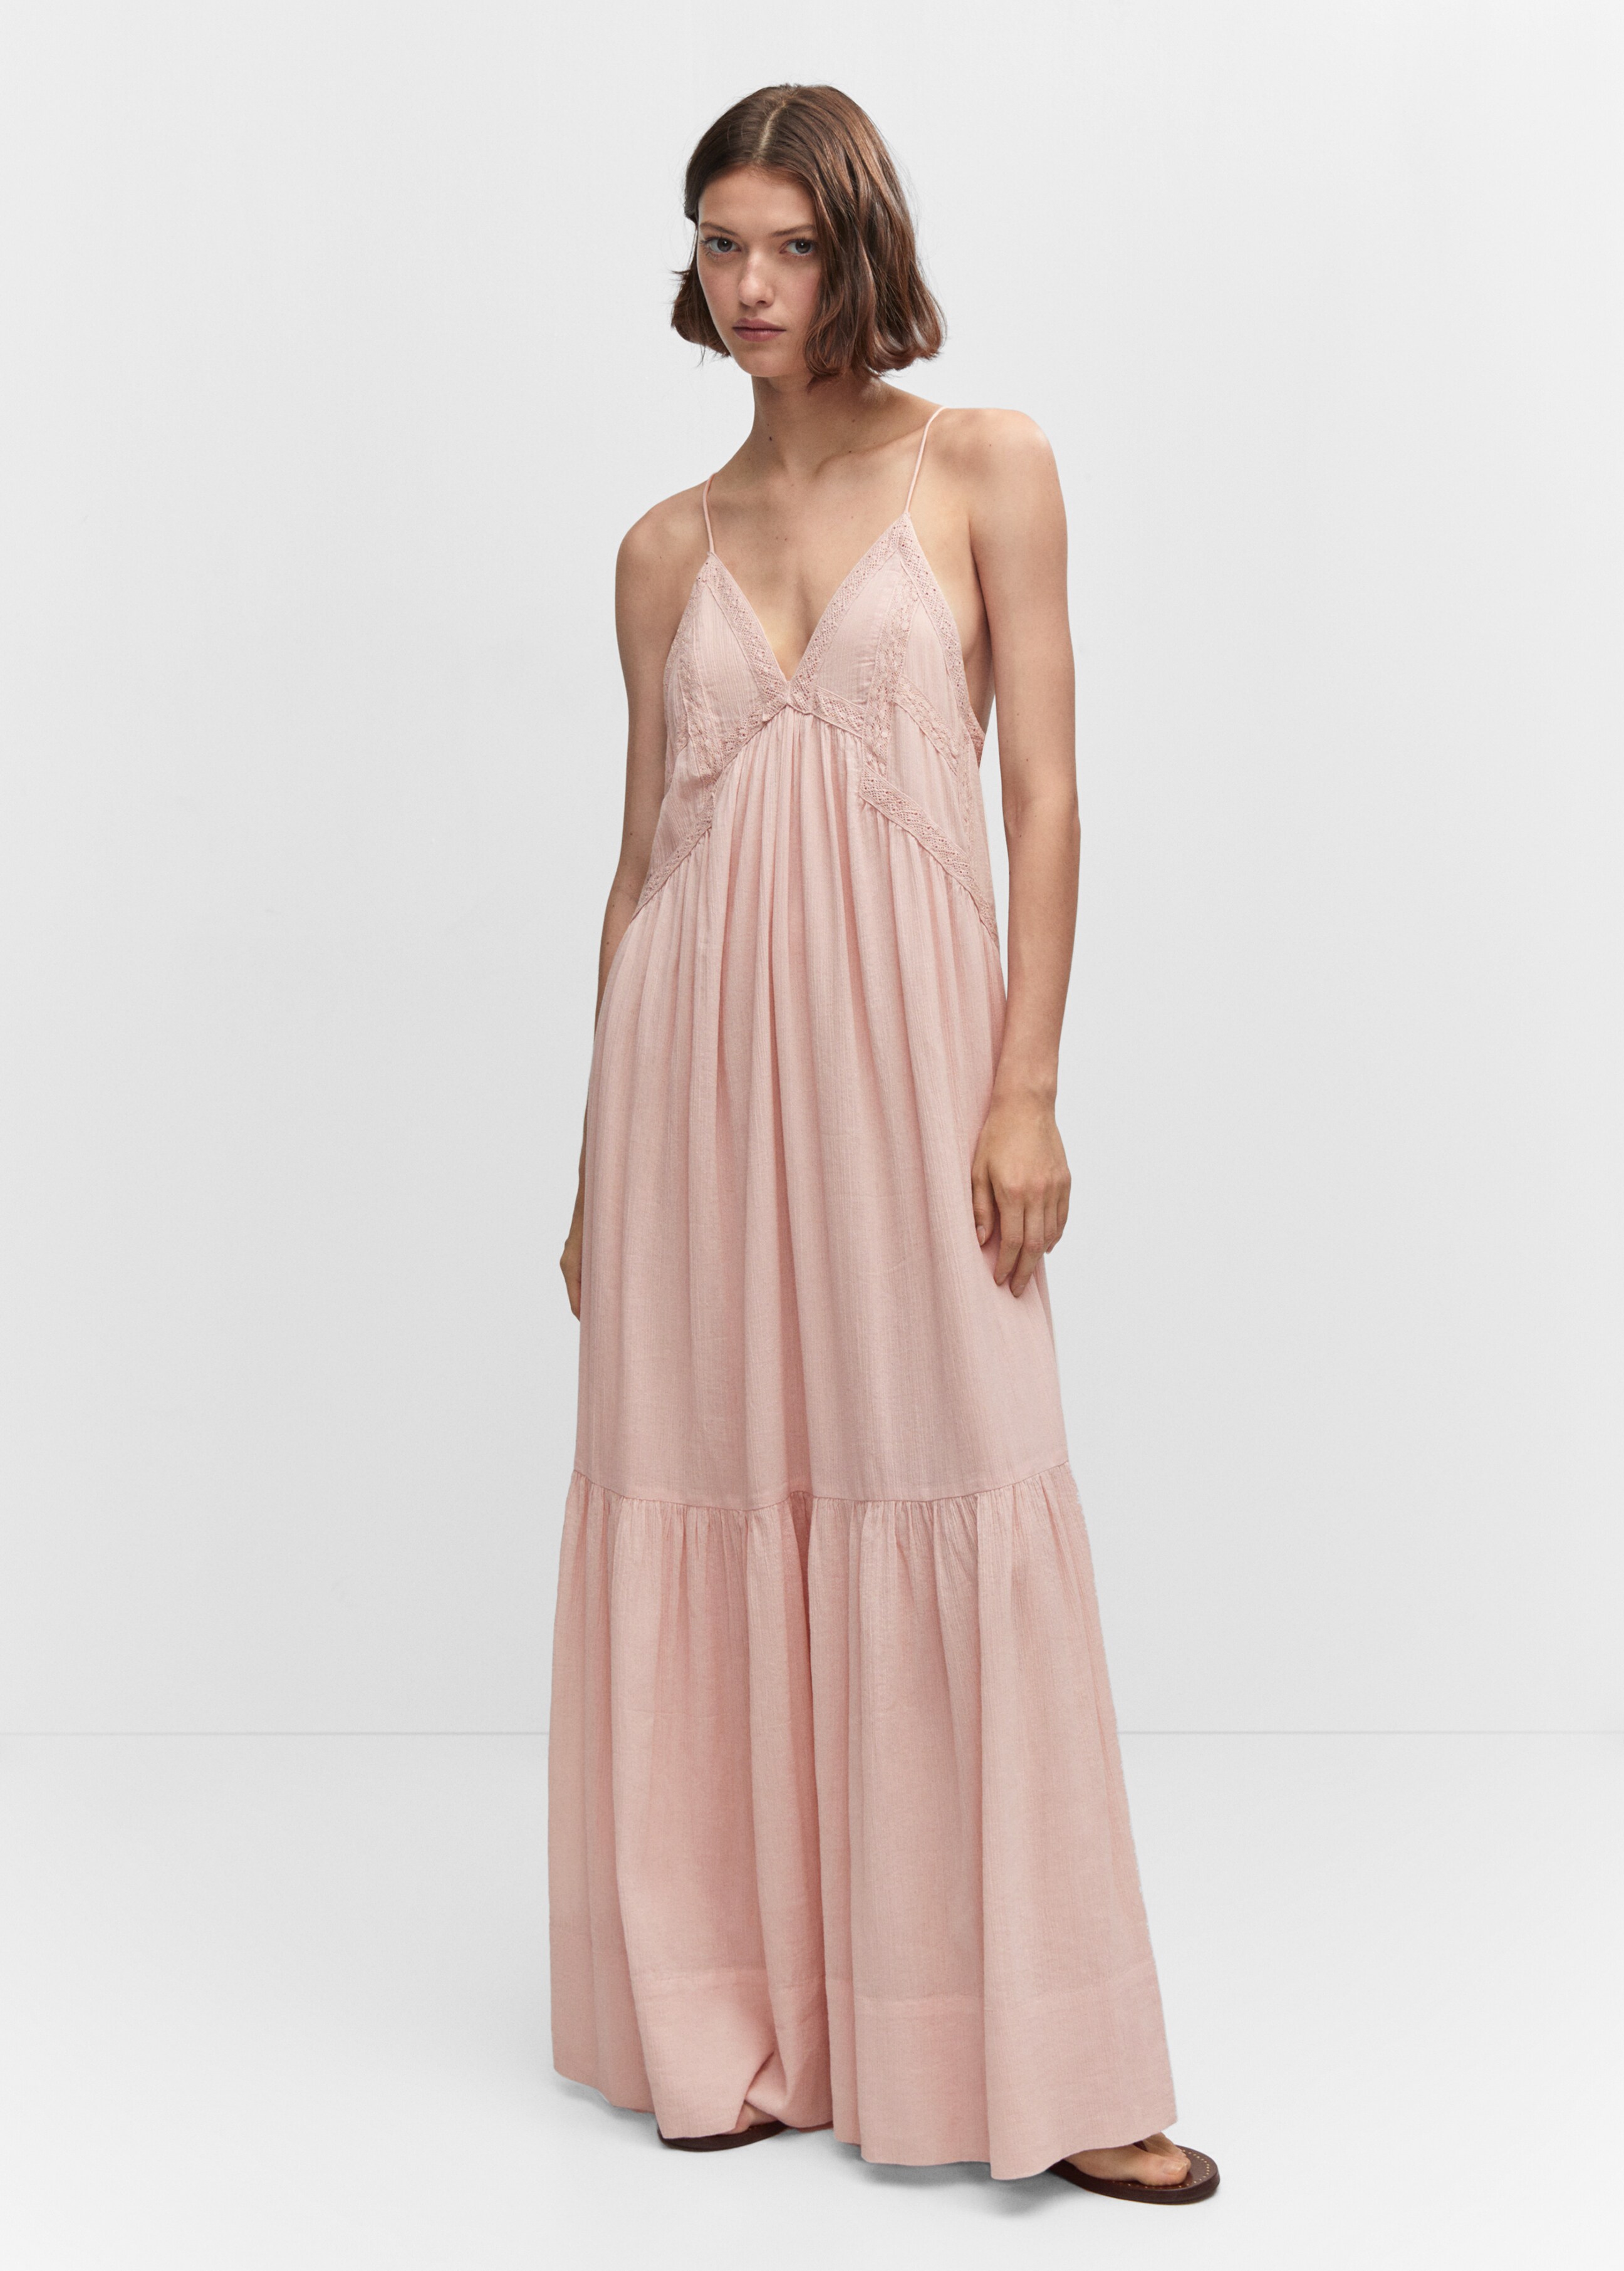 Maxi-dress with lace details - General plane